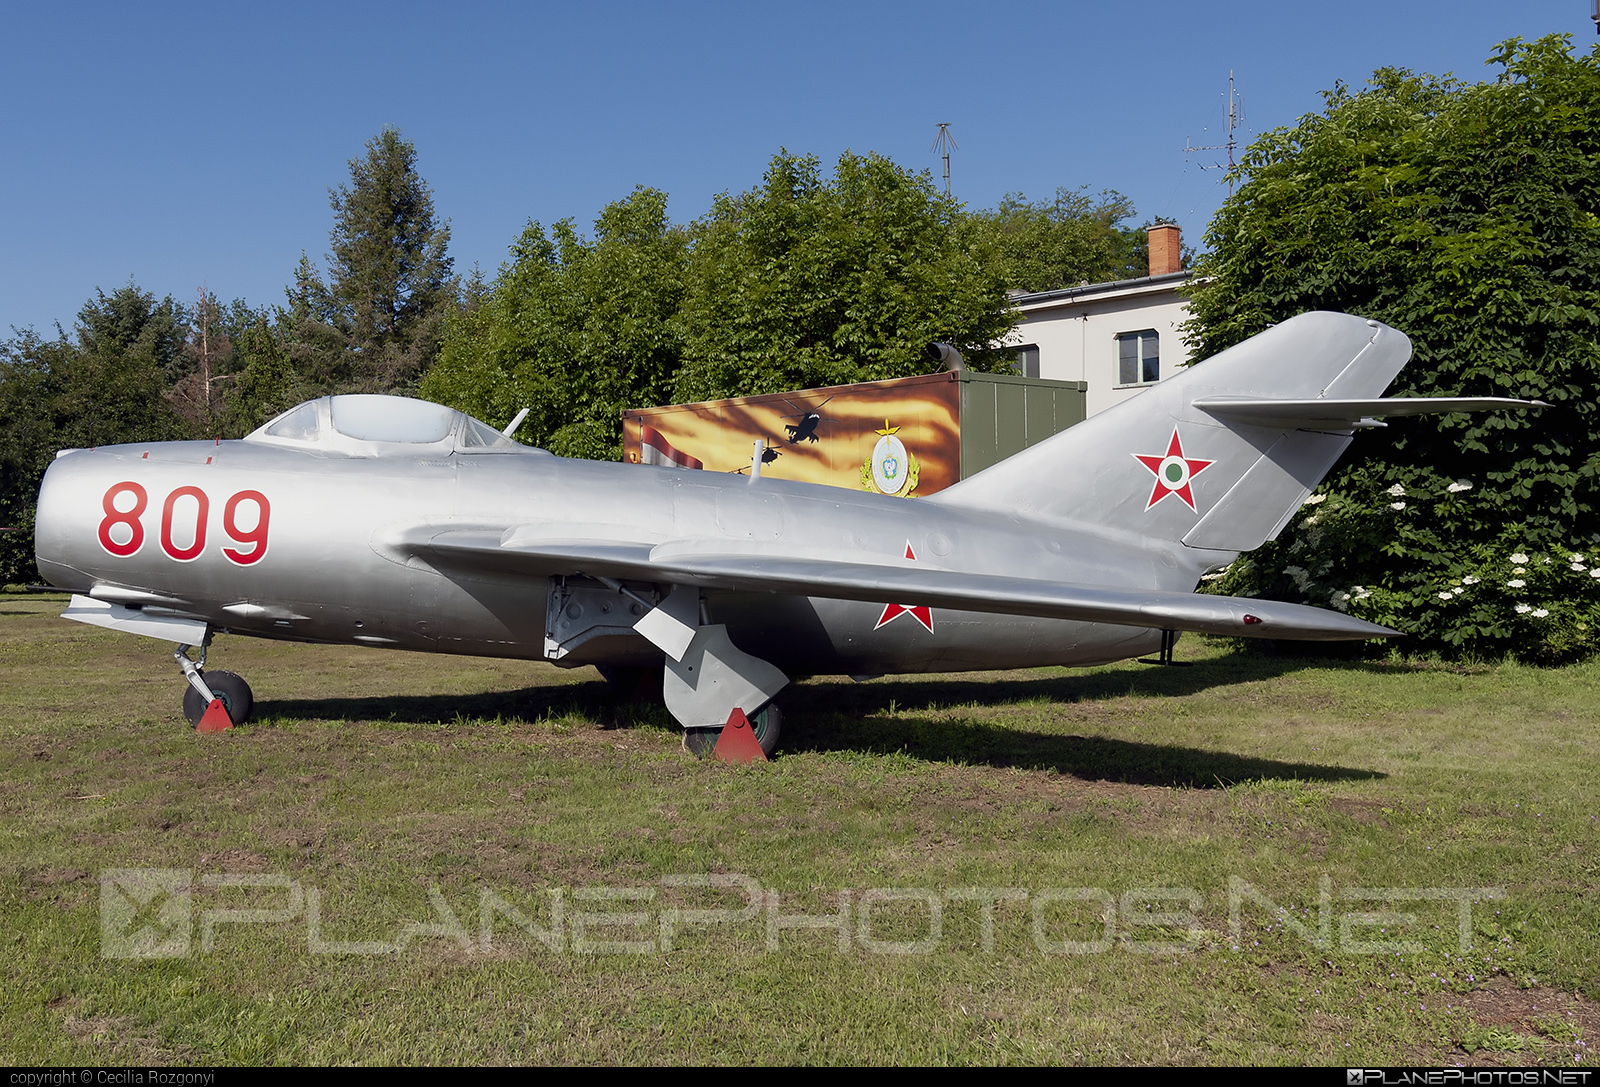 Mikoyan-Gurevich MiG-15bis - 809 operated by Magyar Néphadsereg (Hungarian People's Army) #hungarianpeoplesarmy #magyarnephadsereg #mig #mig15 #mig15bis #mikoyangurevich